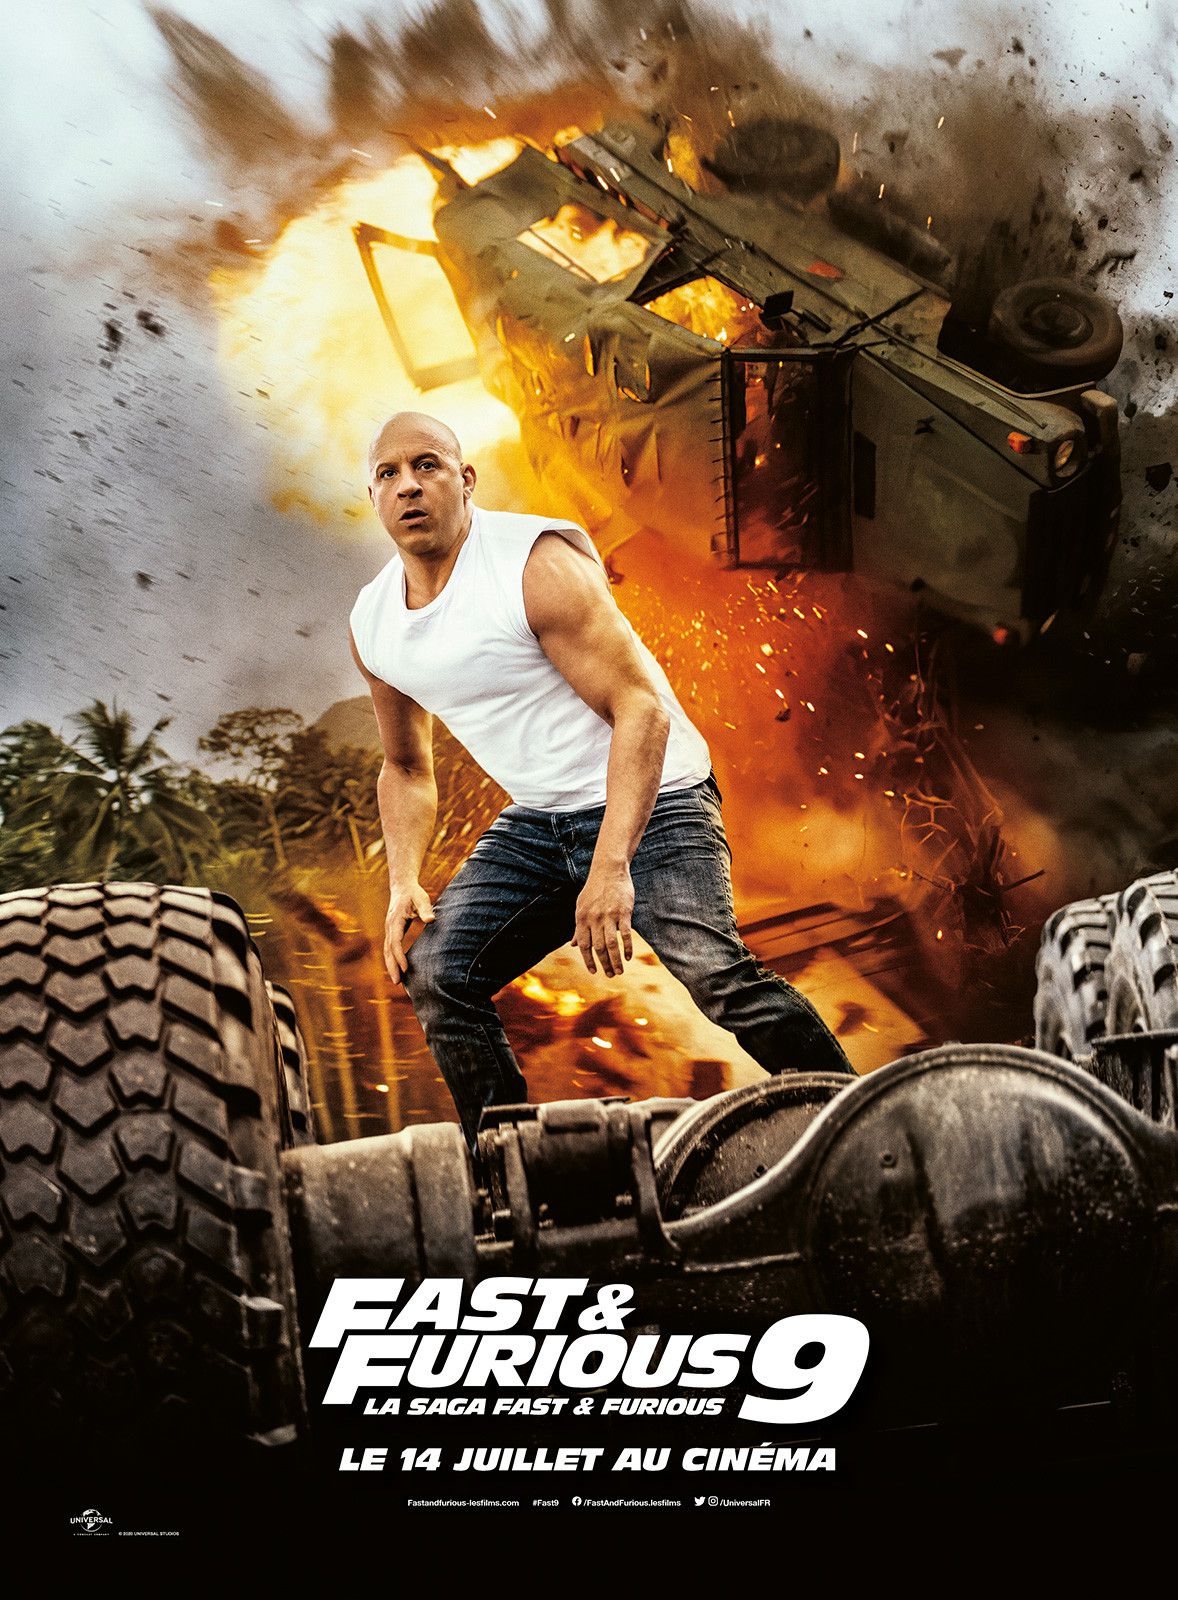 Fast & Furious 9 - Film (2021) streaming VF gratuit complet